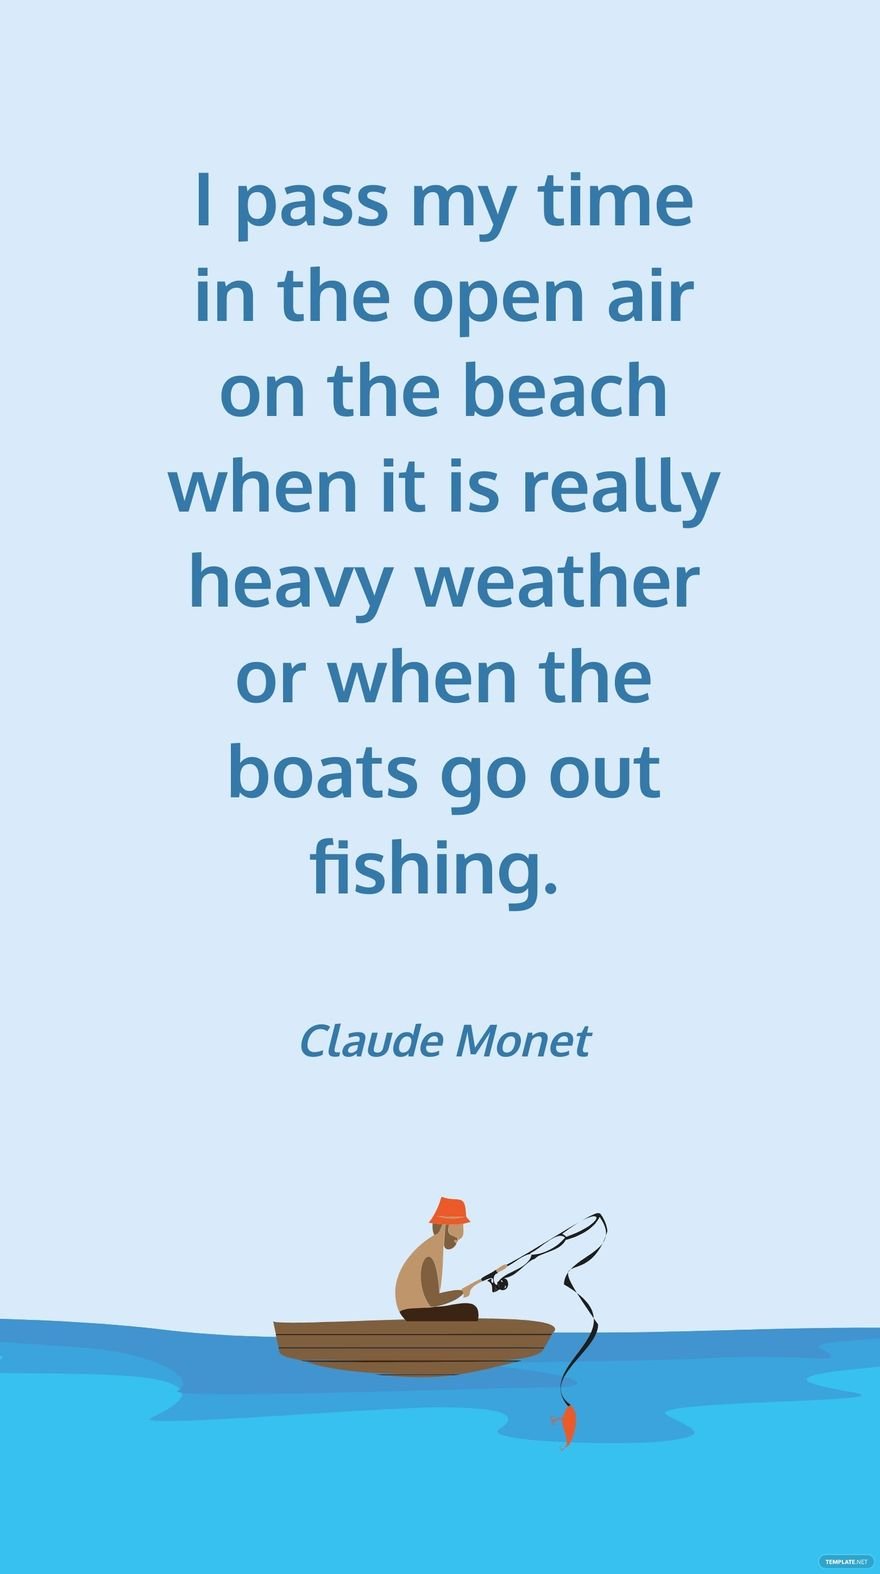 Claude Monet - I pass my time in the open air on the beach when it is really heavy weather or when the boats go out fishing.